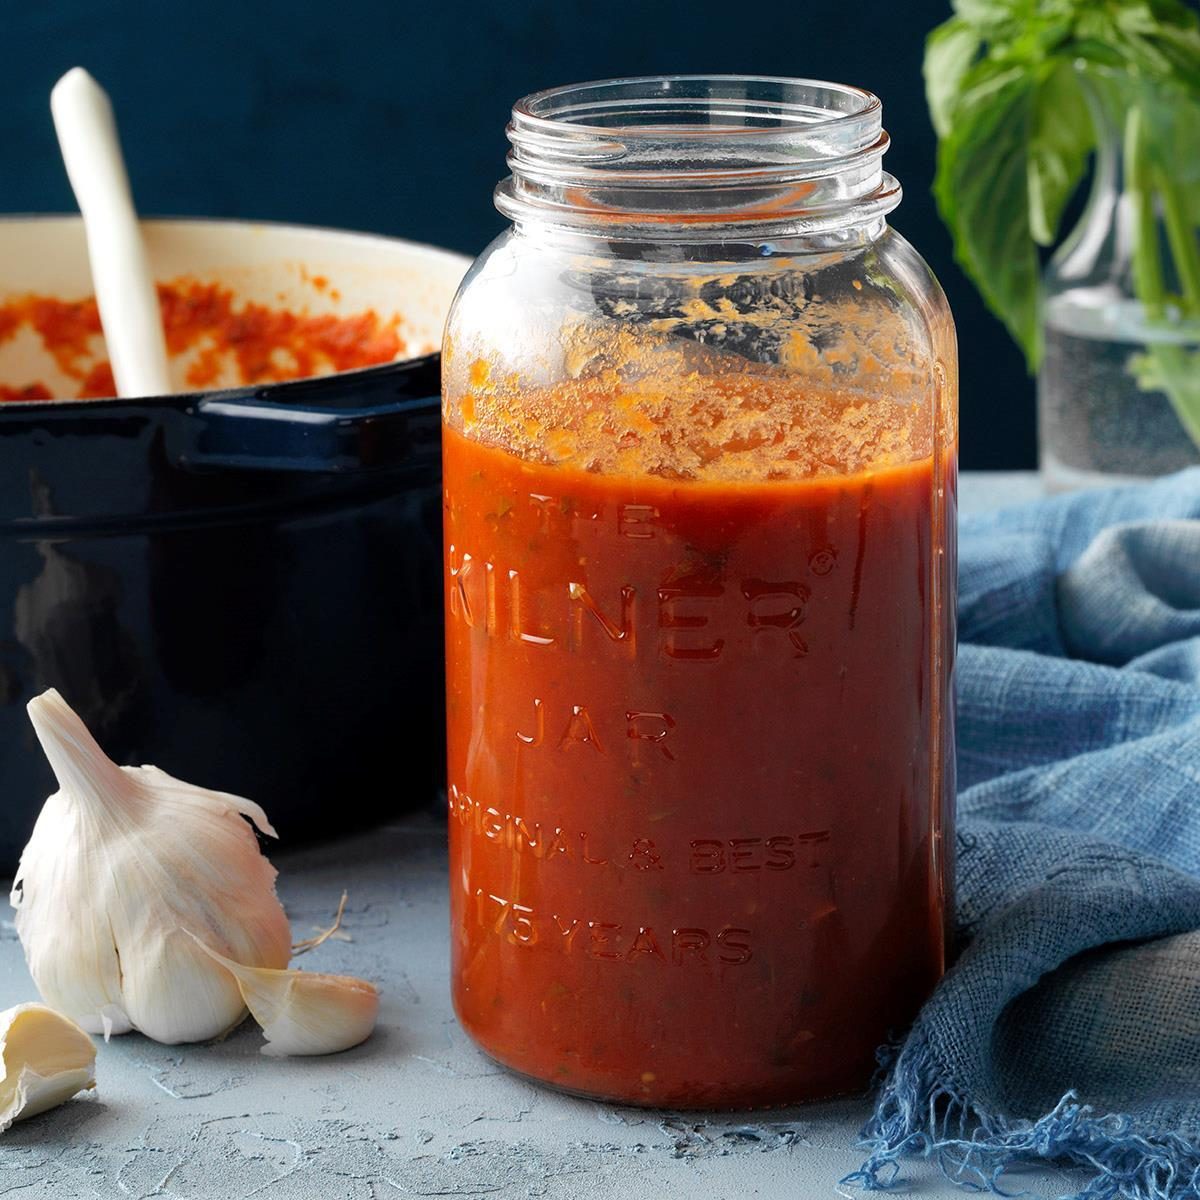 Types of Pasta Sauces: Ingredients, Differences, & More